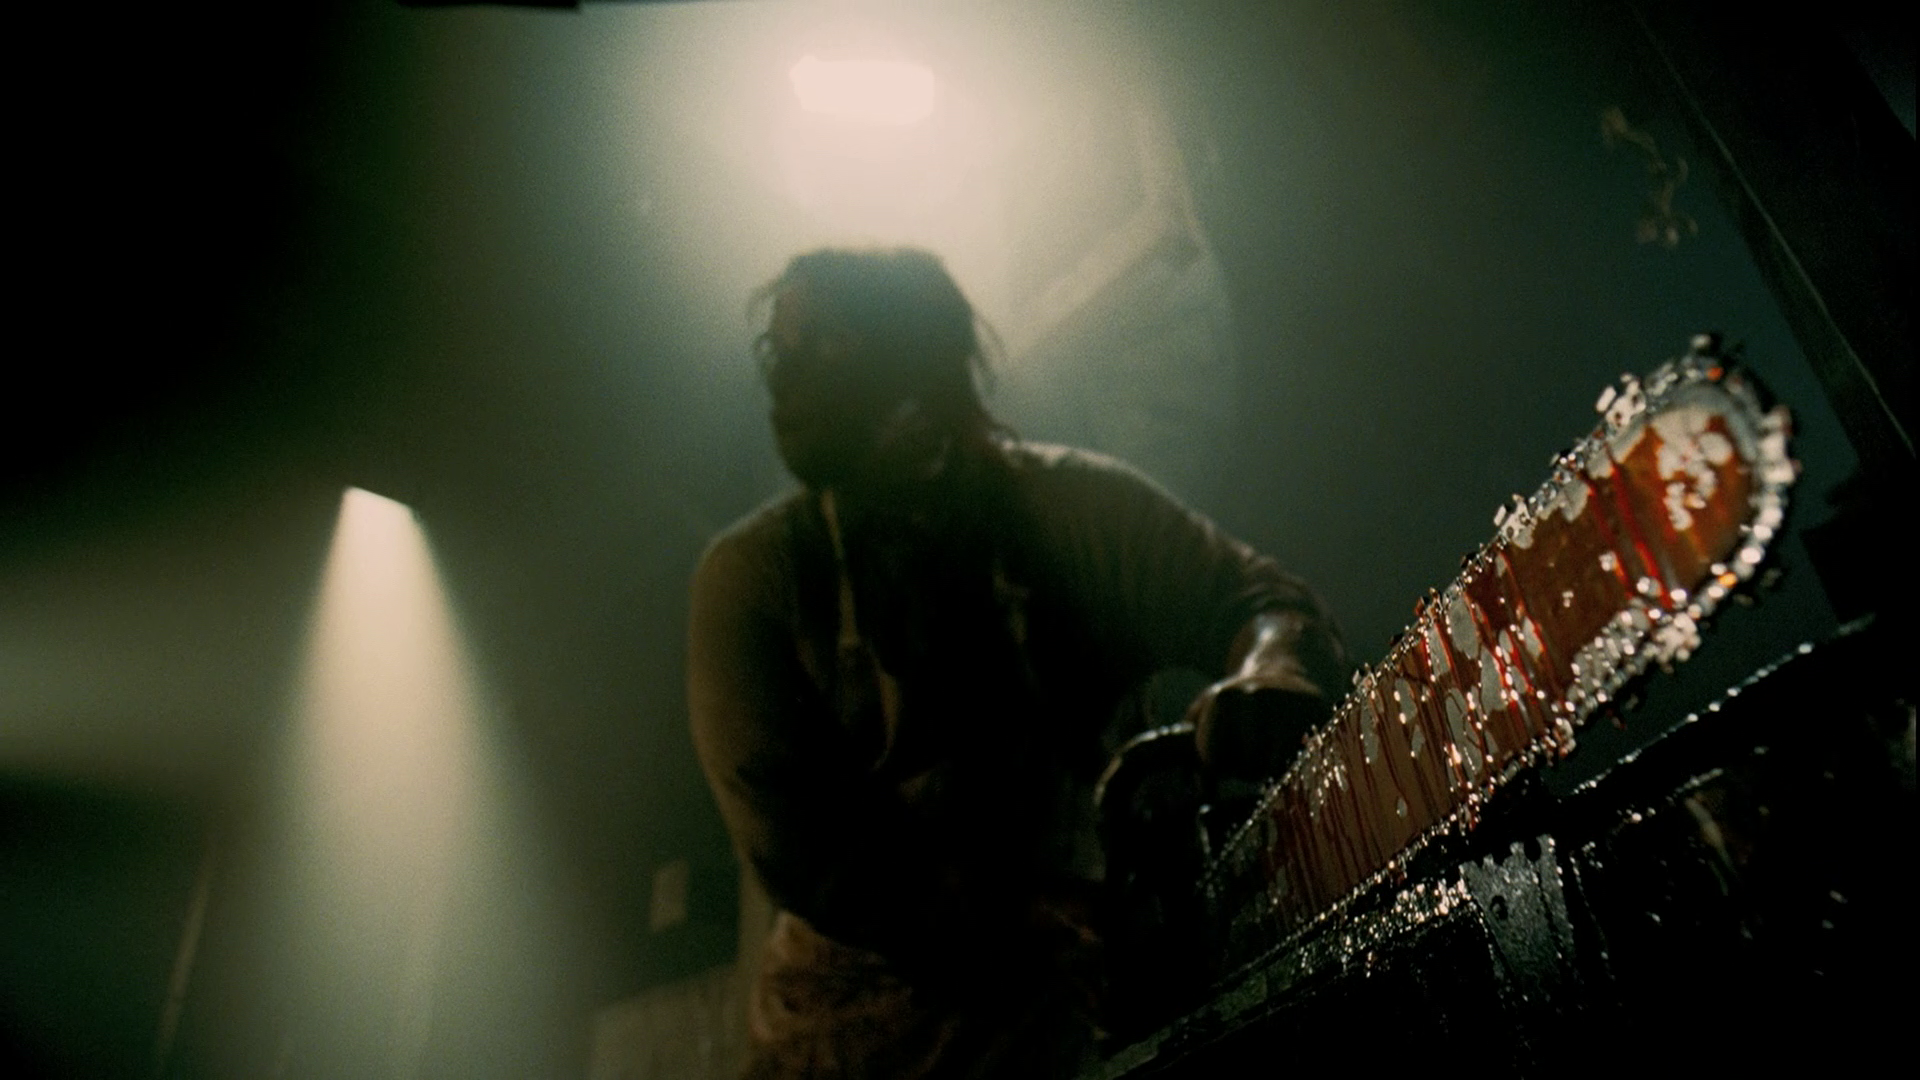 texas, Chainsaw, Dark, Horror, Blood Wallpapers HD / Desktop and Mobile